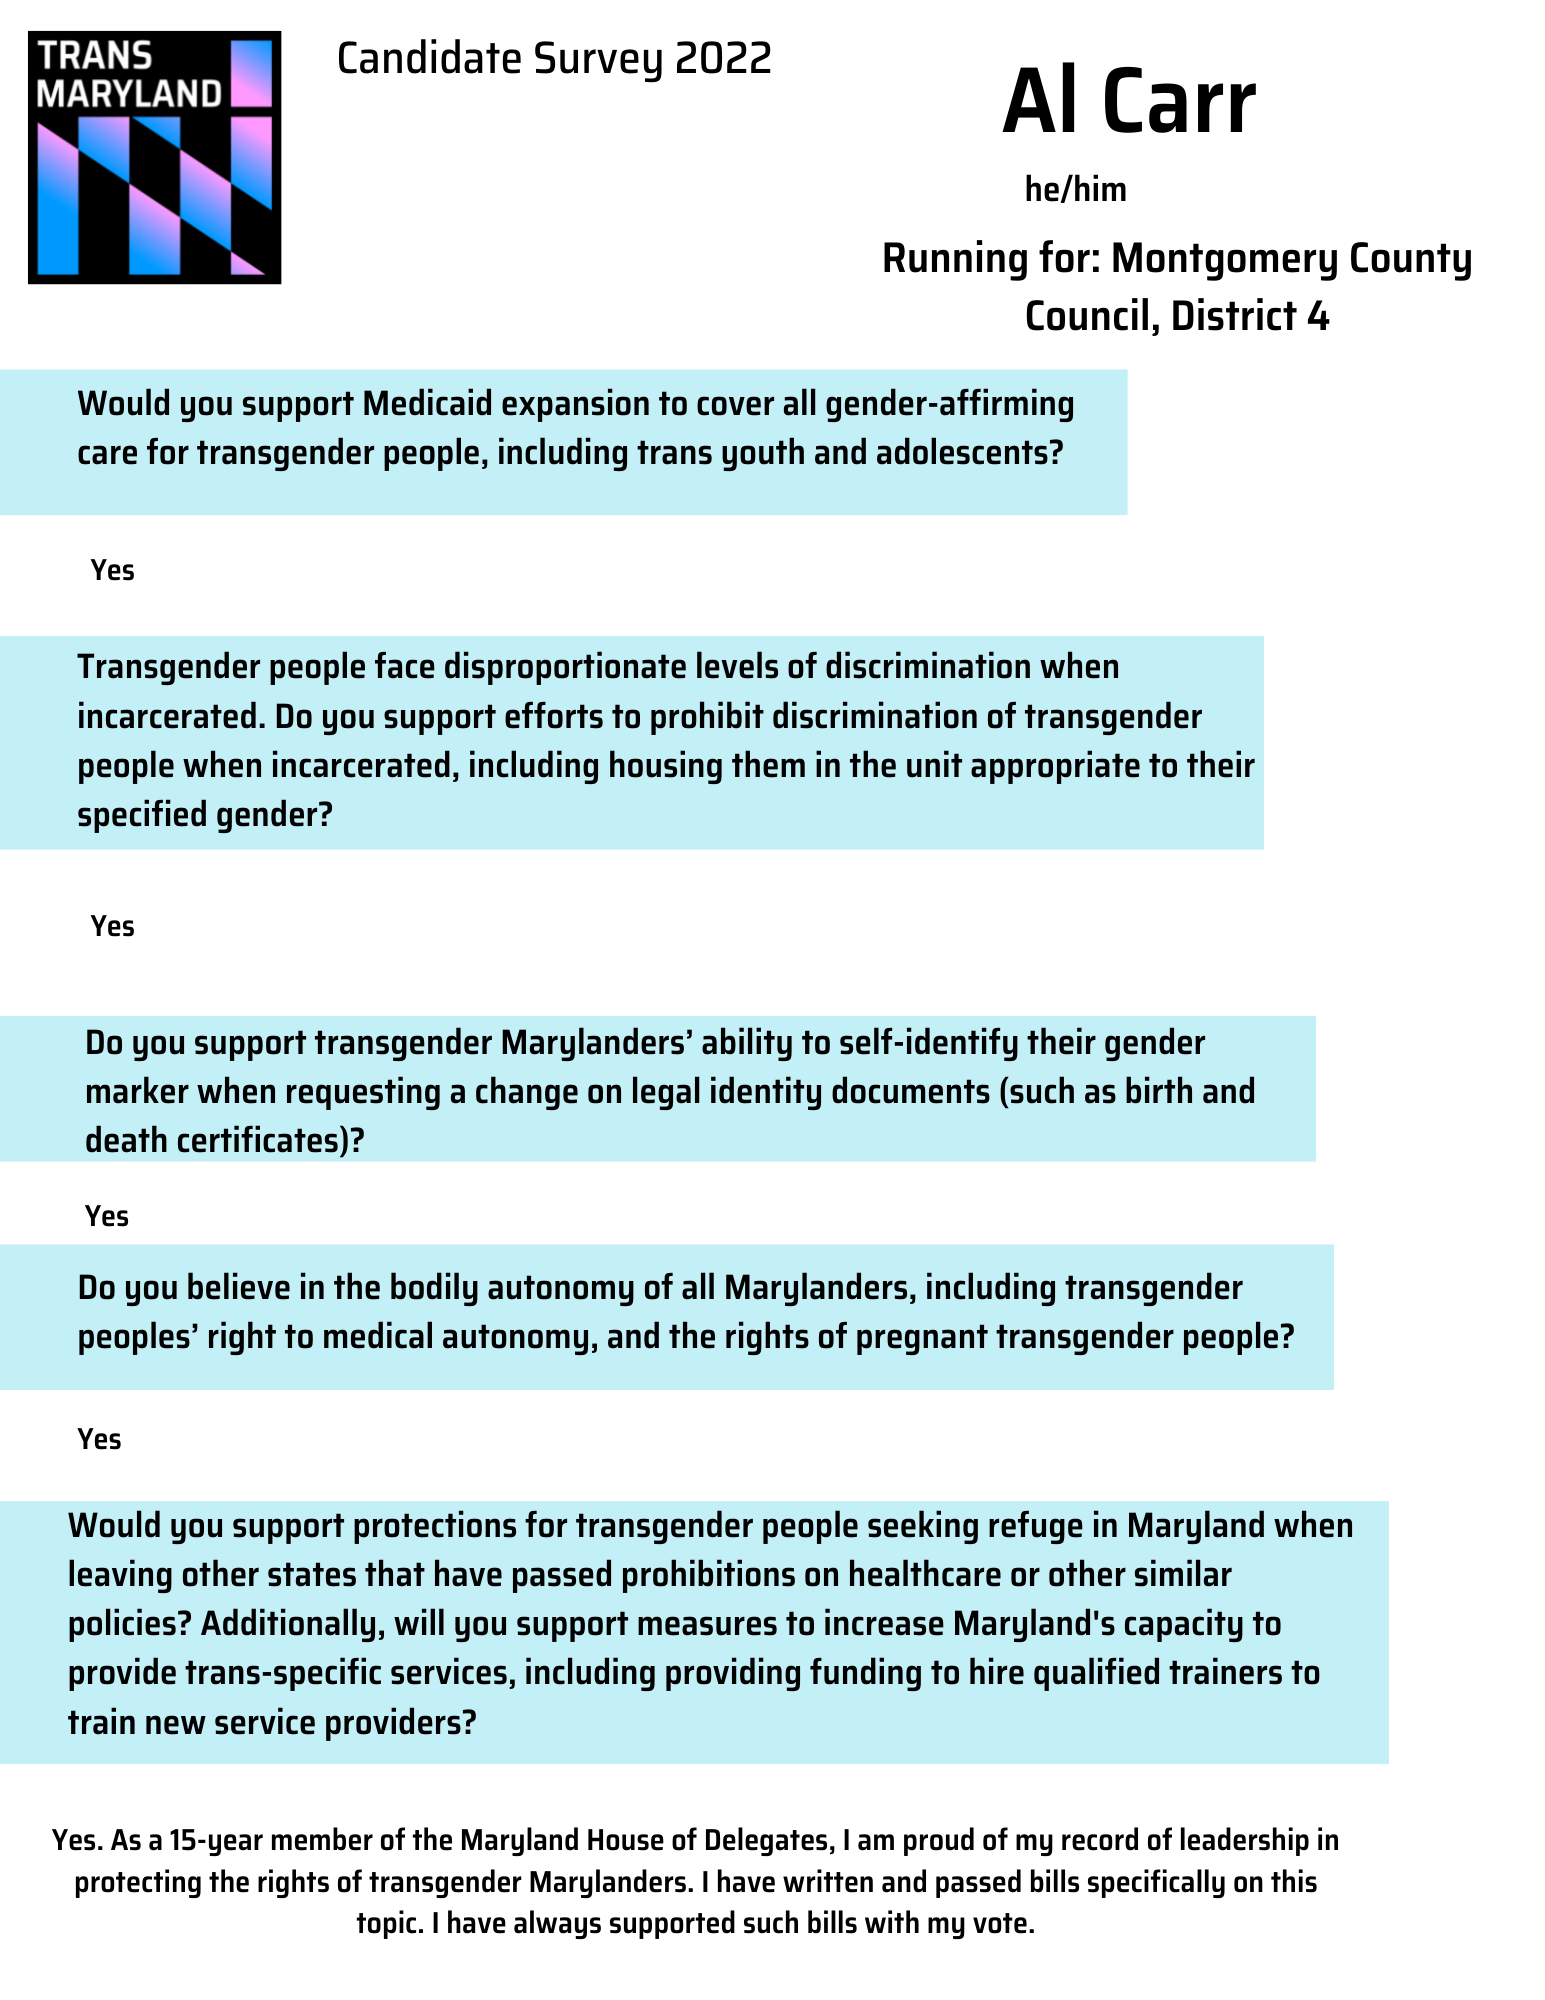 candidate survey 2022- county council.png